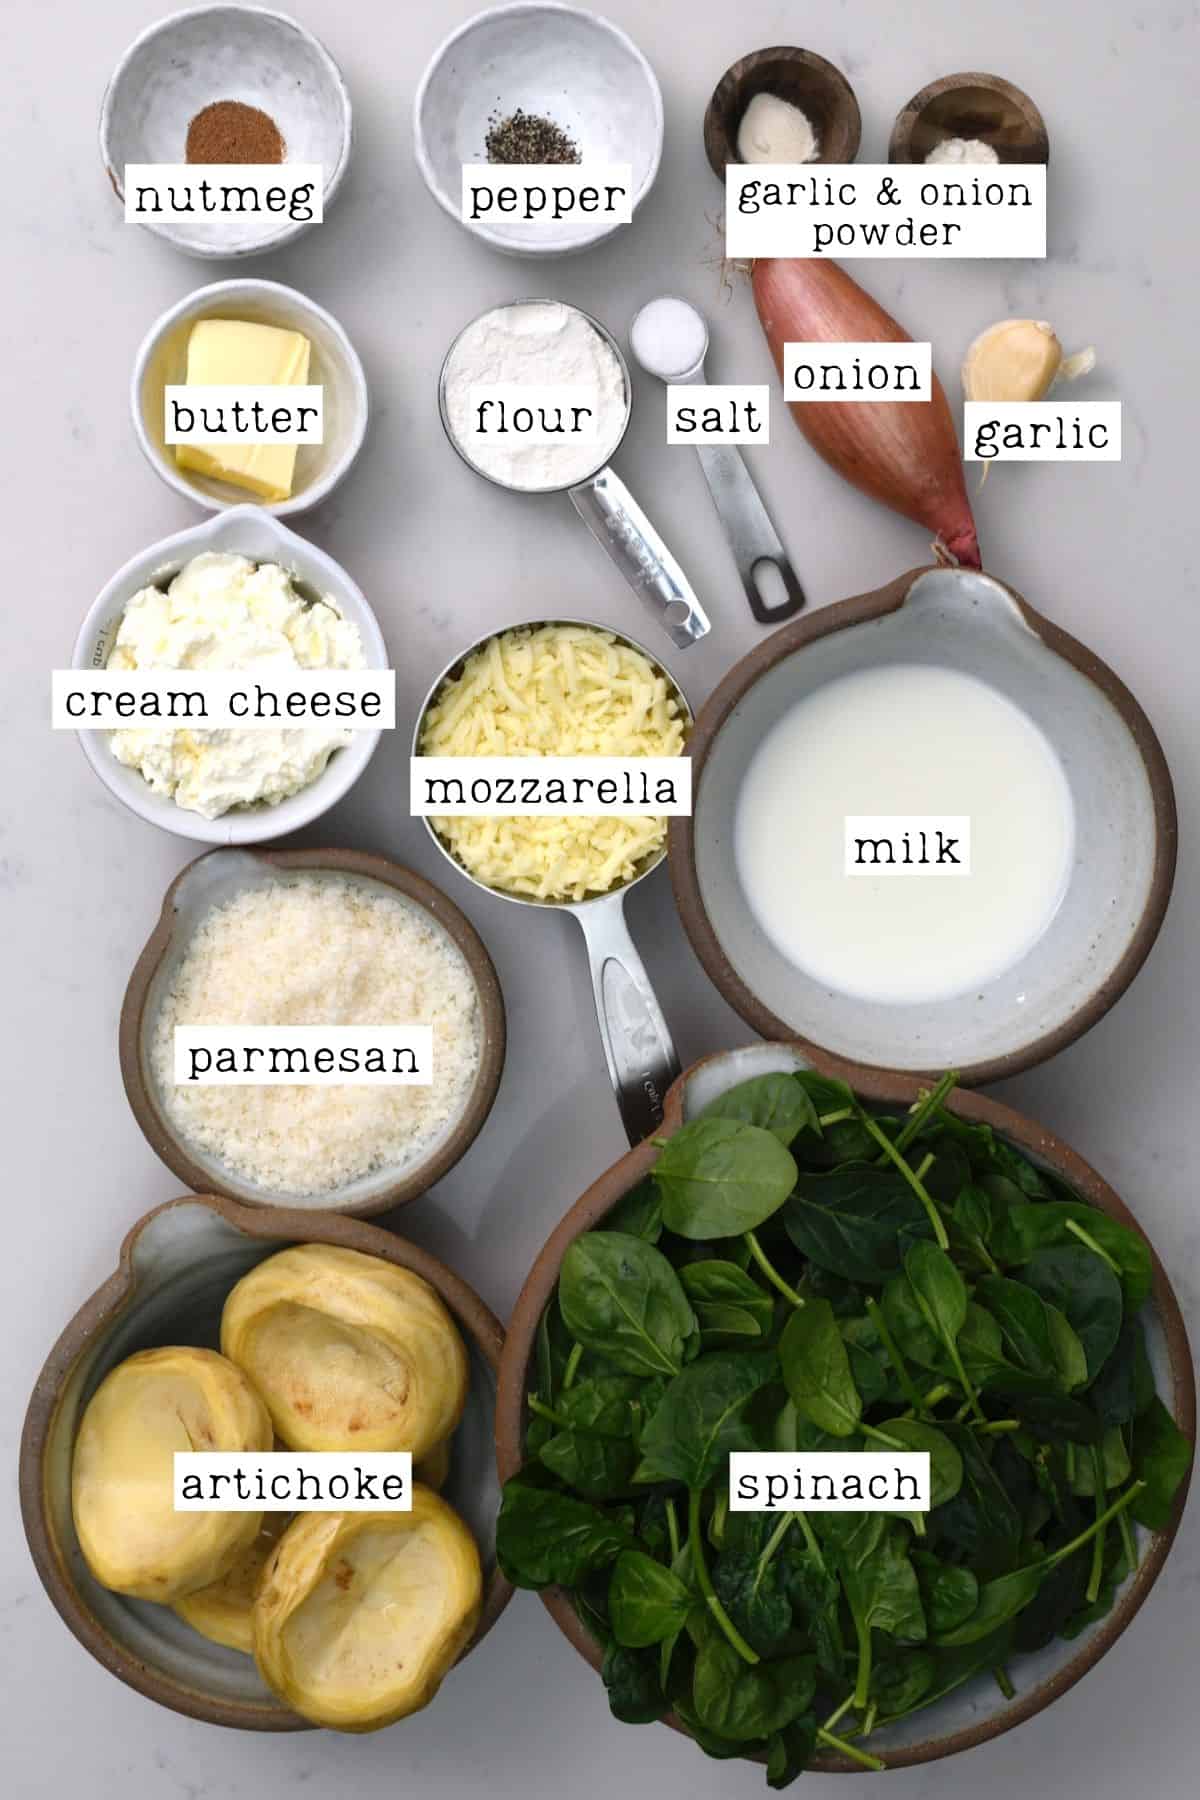 Ingredients for artichoke spinach dip